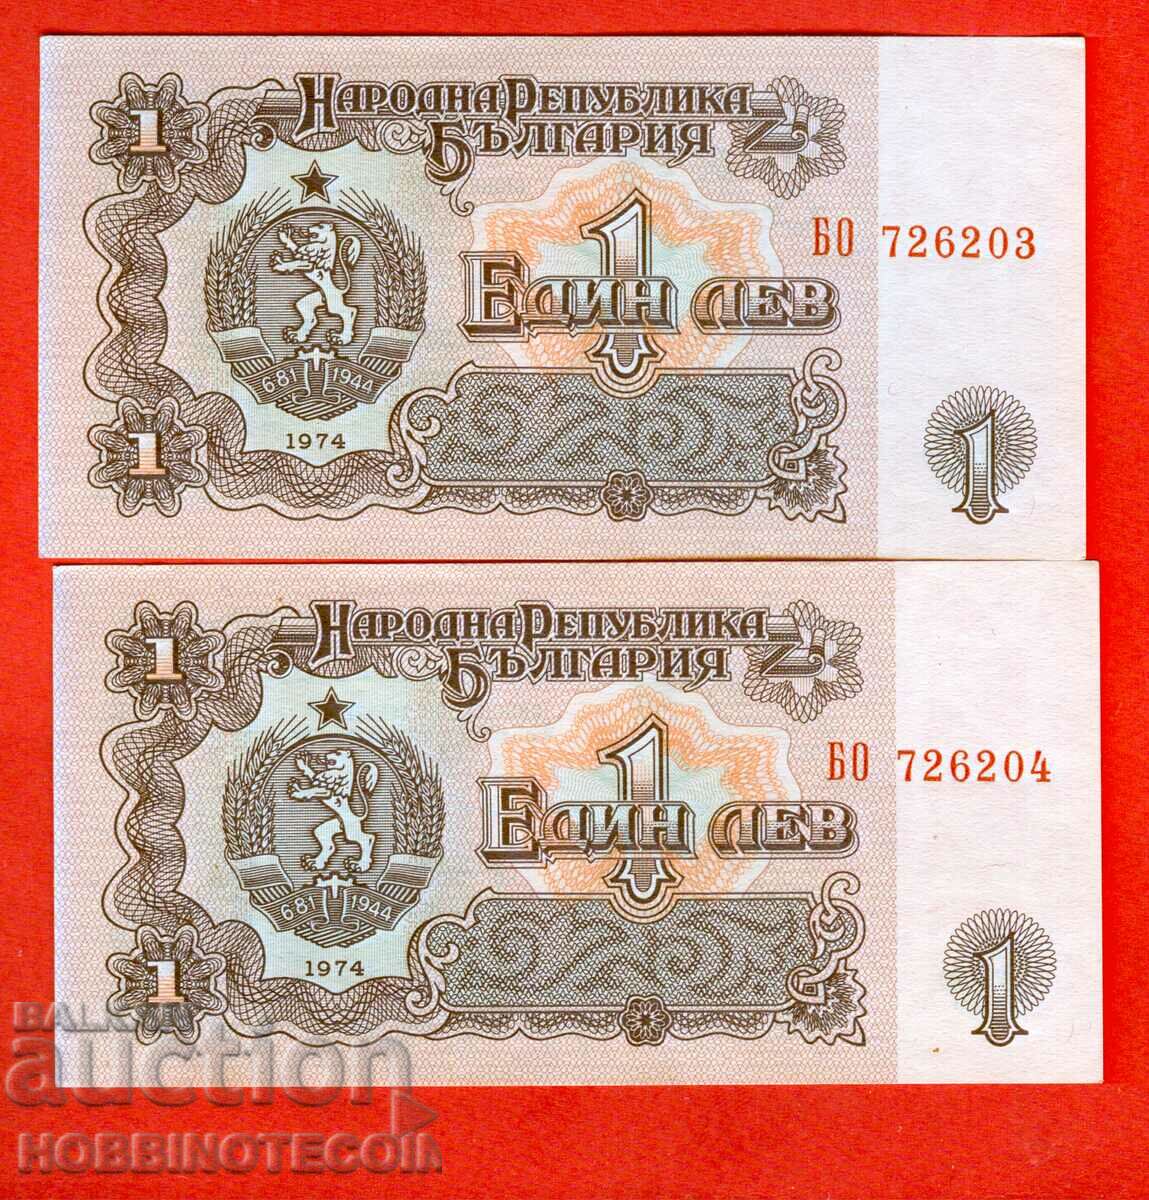 BULGARIA PAIR 2 x 1 lev issue issue 1974 6 digits BO NEW UNC